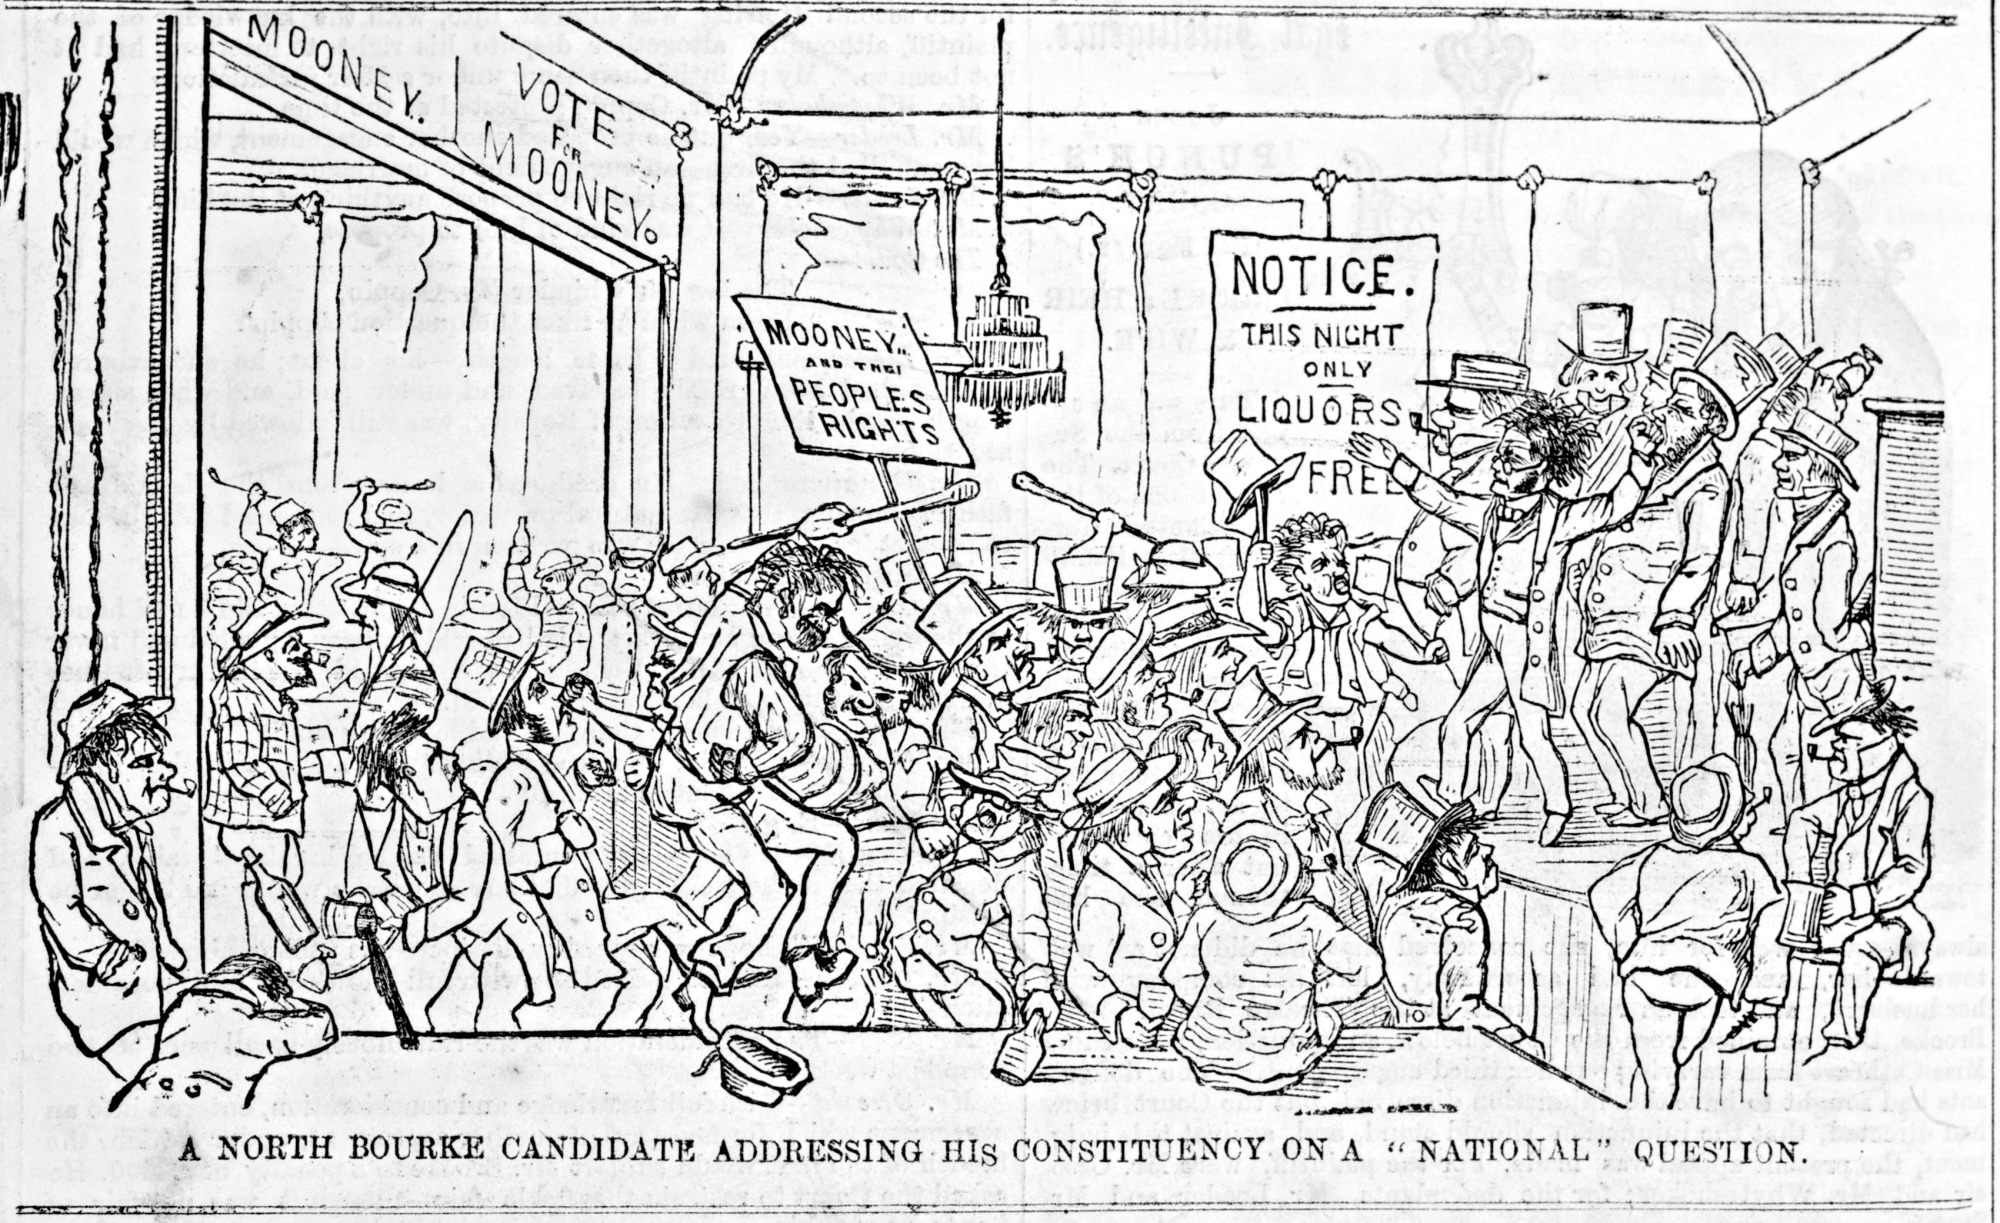 <p><em>Electioneering in the pub</em>, published by Edgar Ray and Frederick Sinnett, 1855</p>